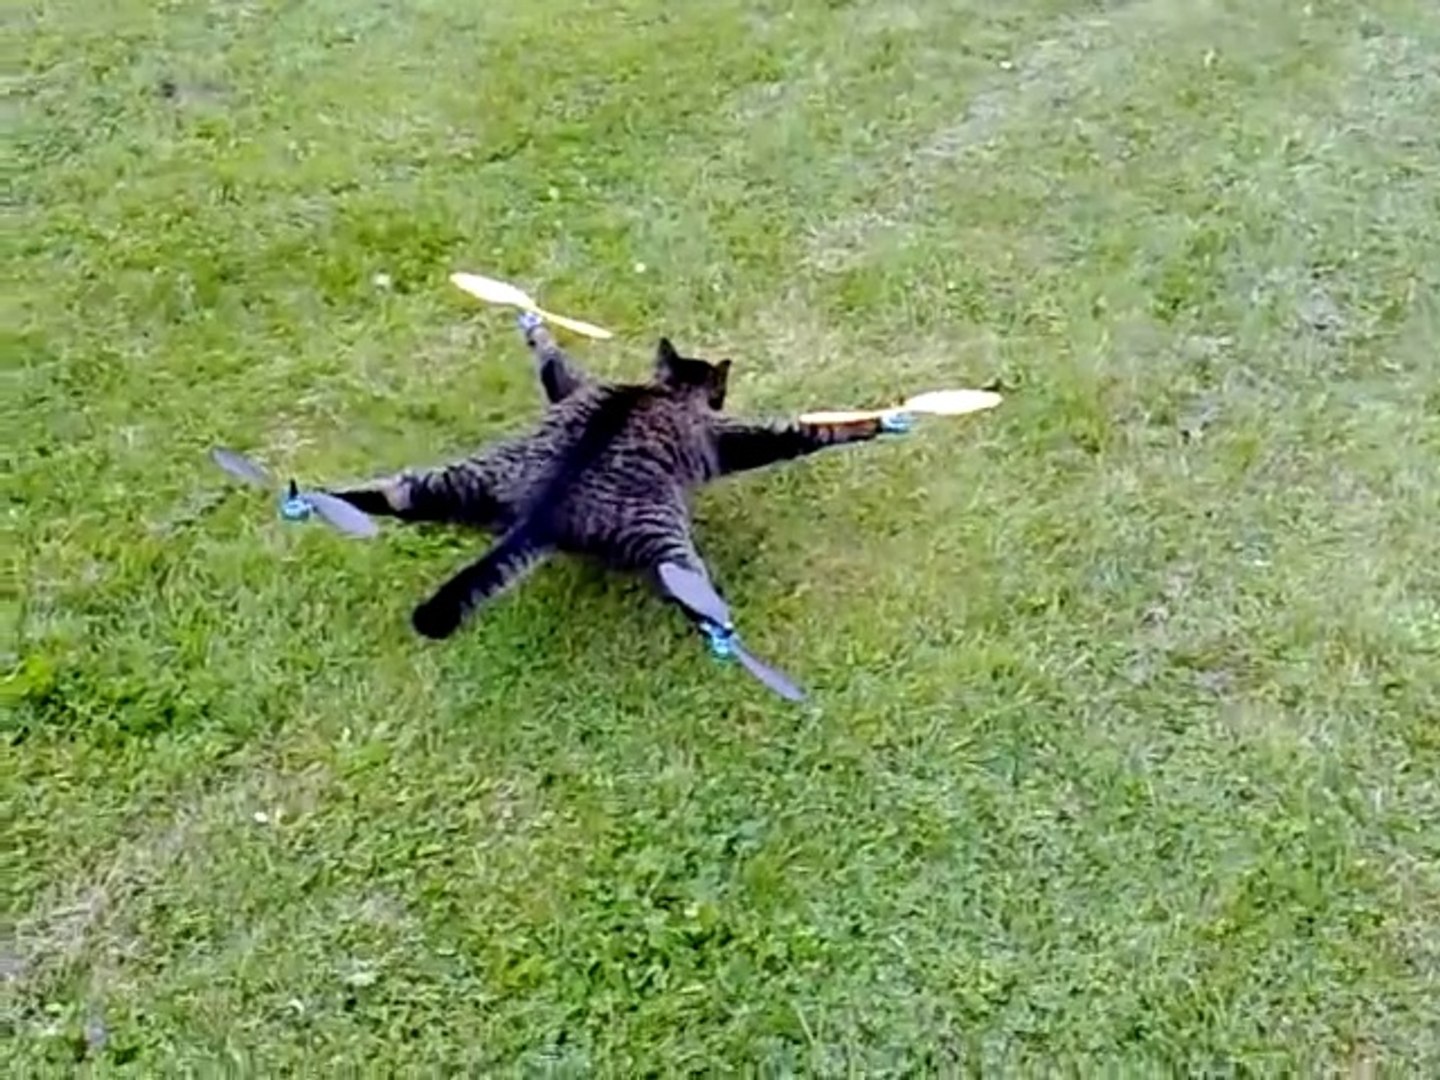 Guy stuffed his dead cat and made it into a drone - Vidéo Dailymotion